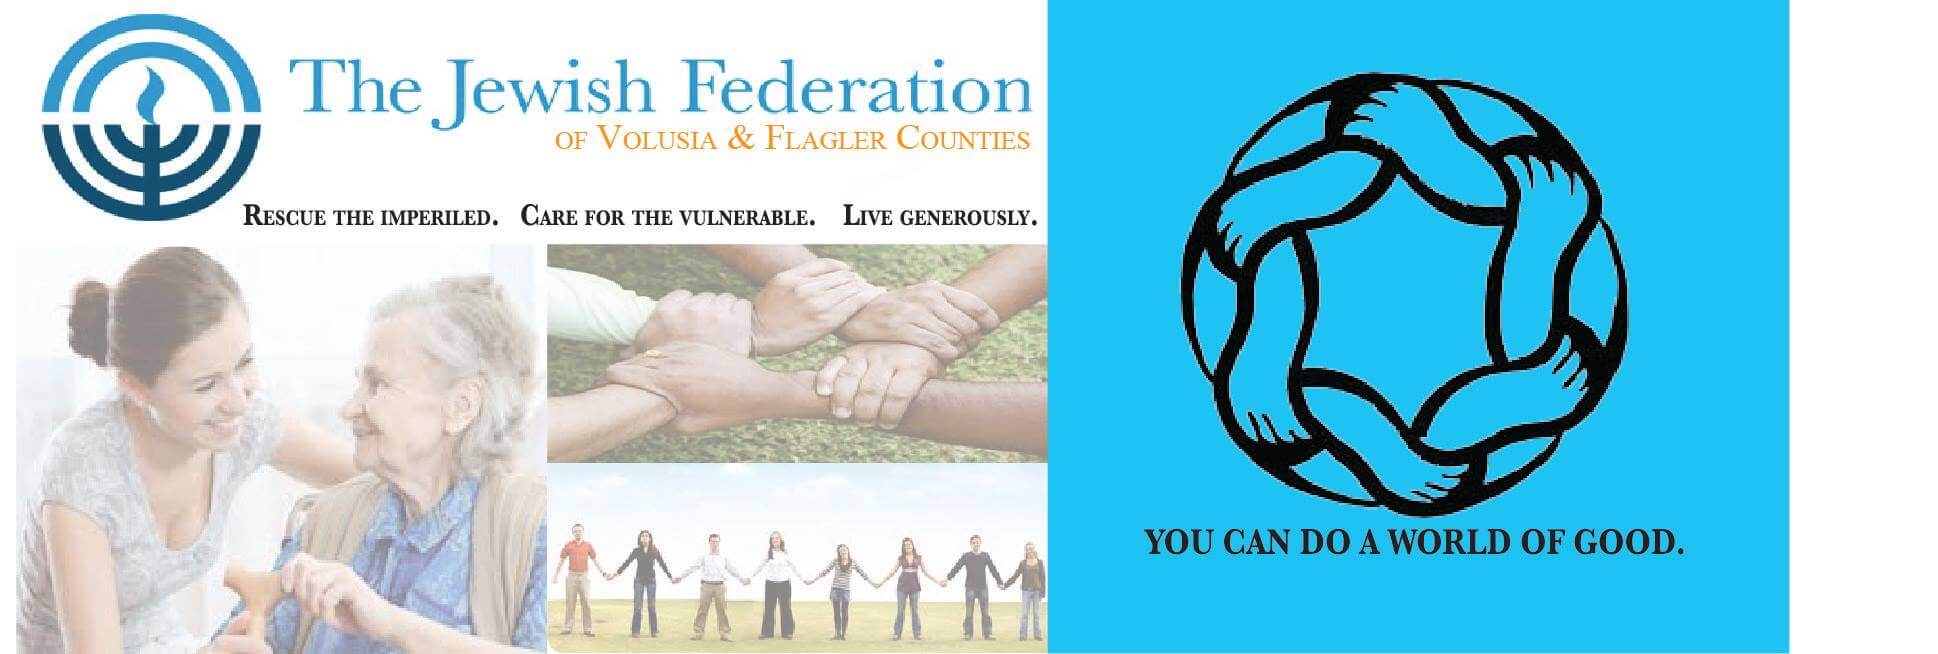 Jewish Federation of Volusia & Flagler Counties